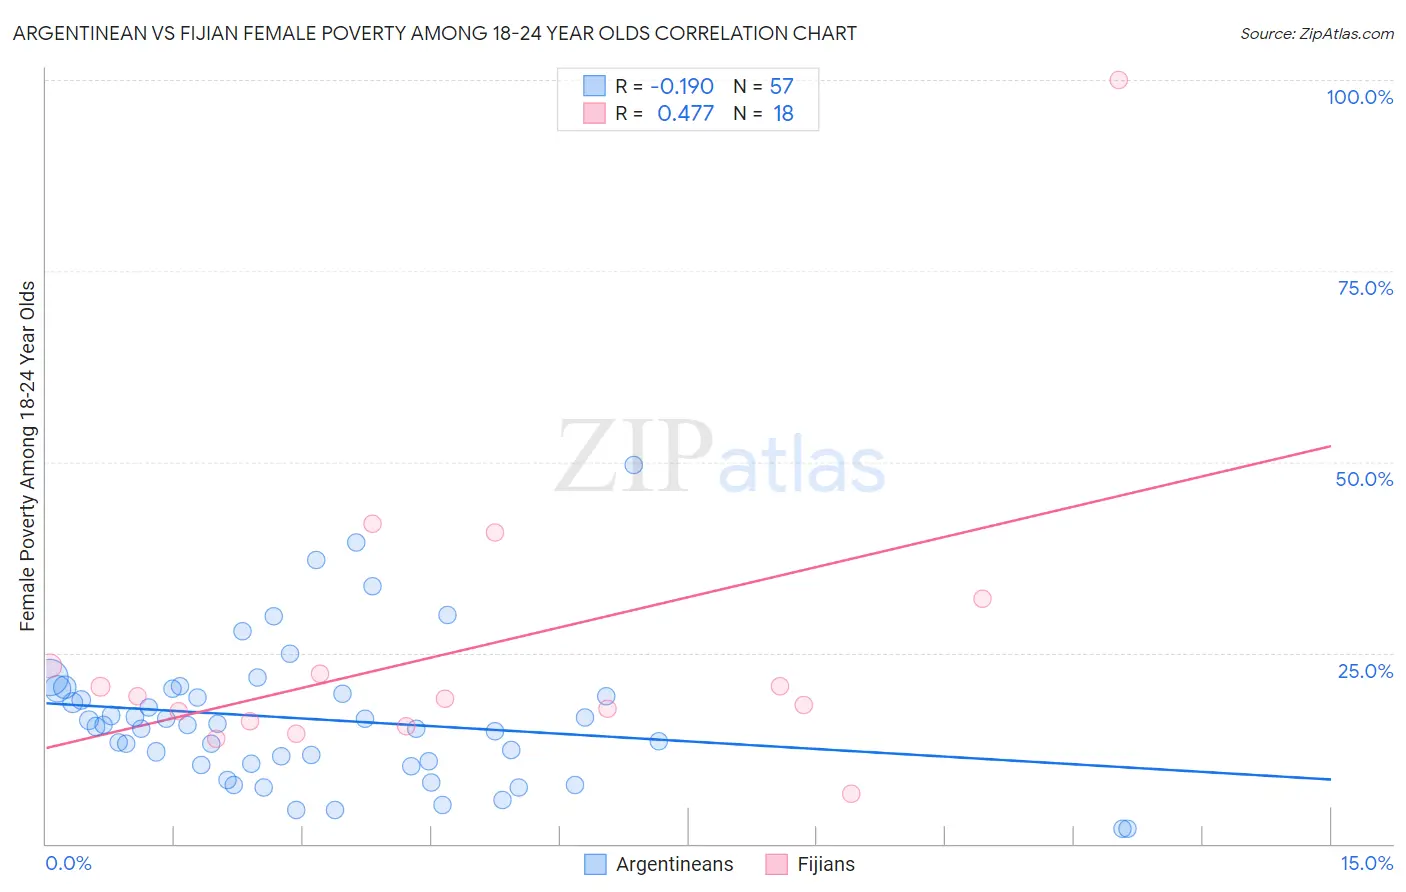 Argentinean vs Fijian Female Poverty Among 18-24 Year Olds